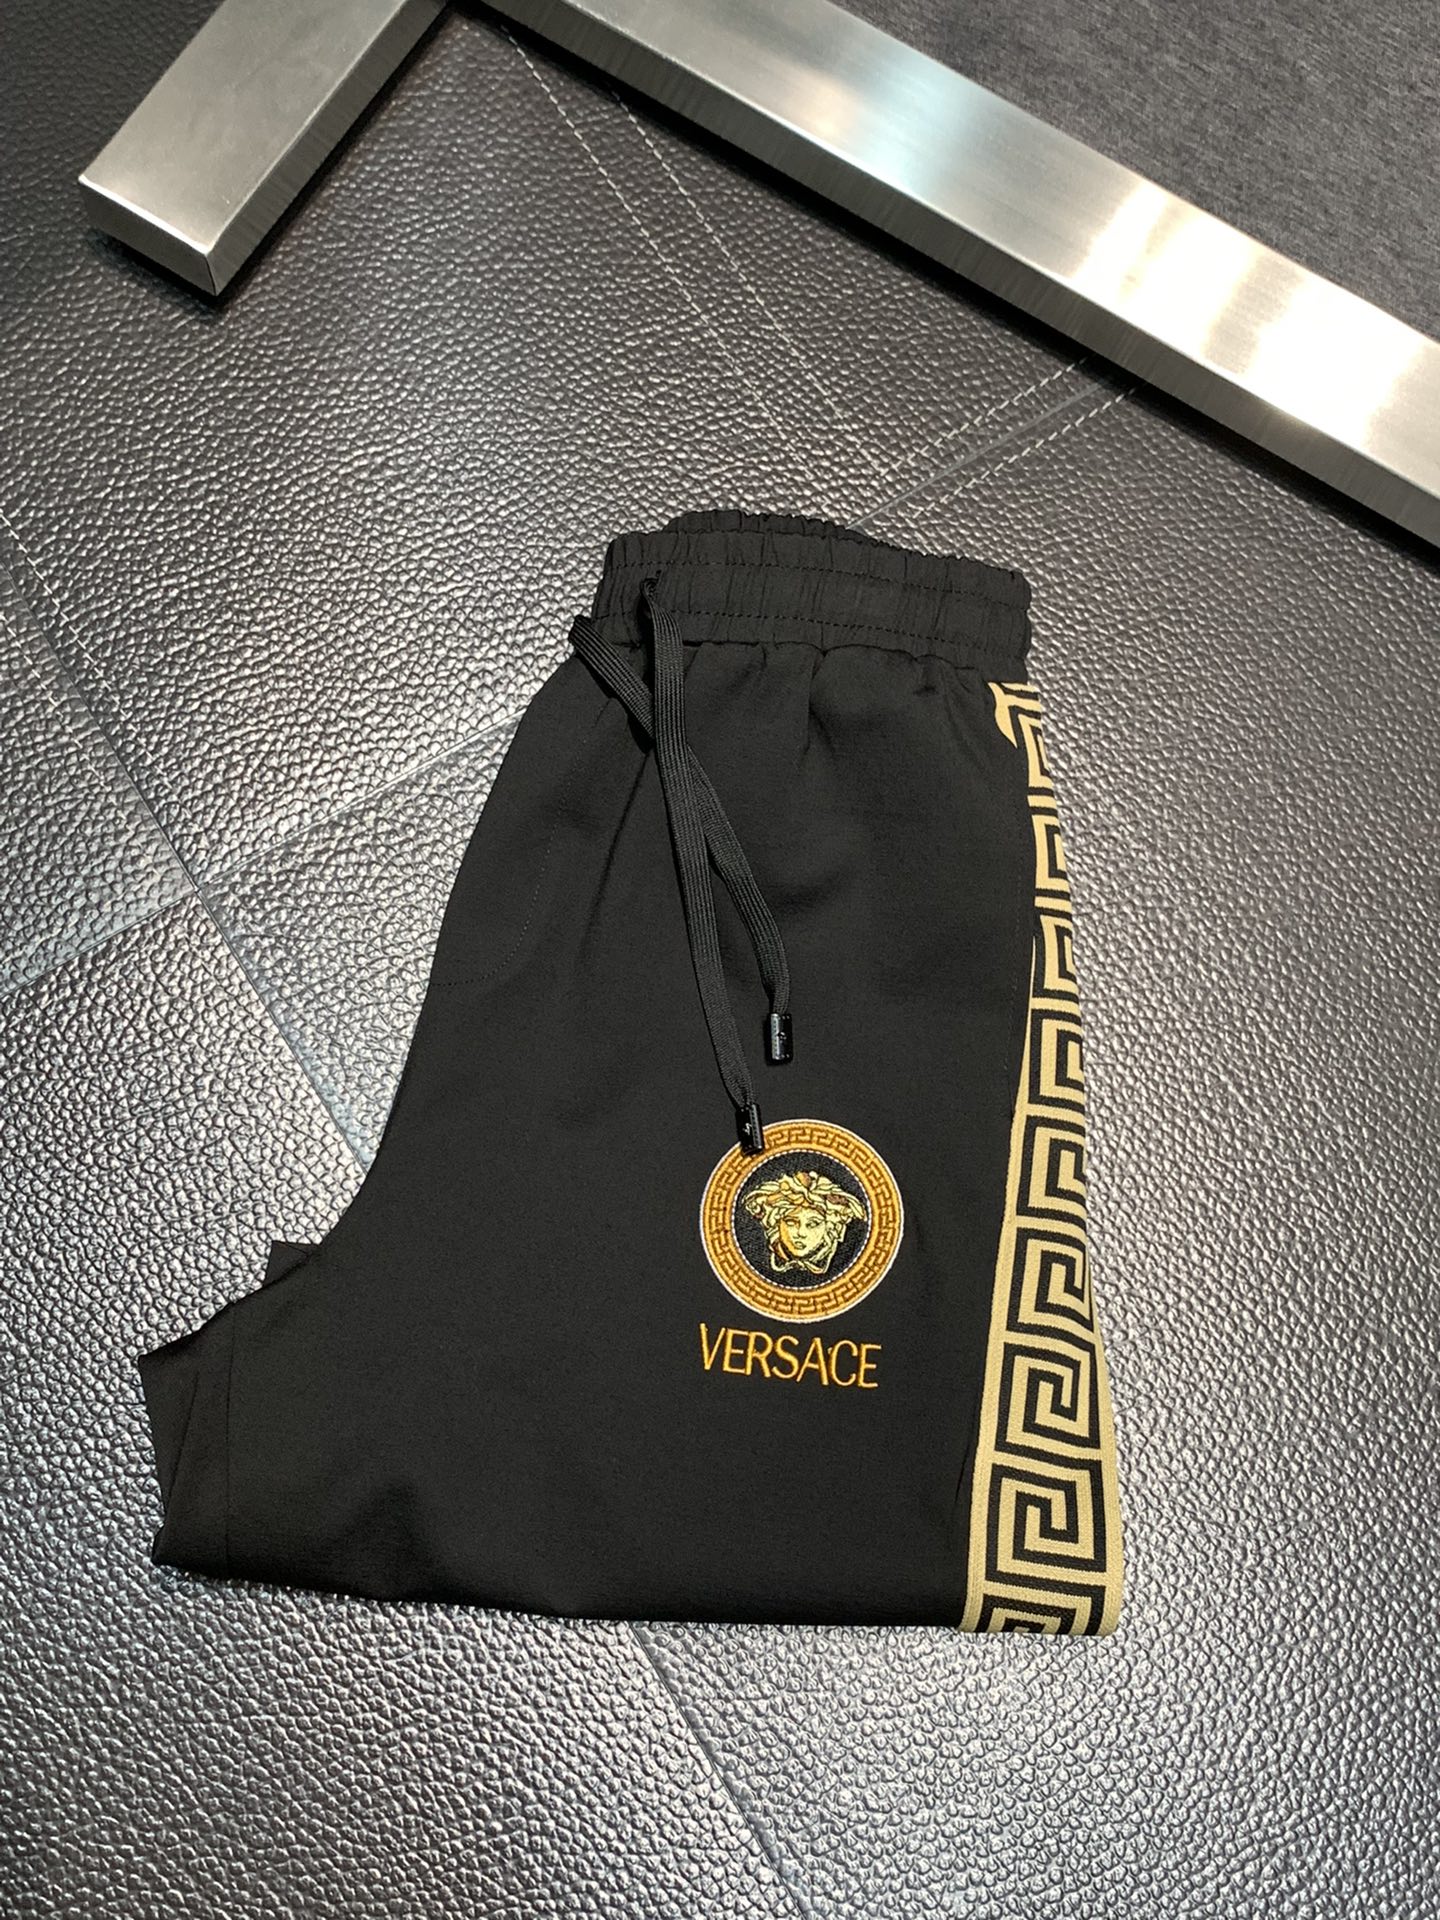 Versace Clothing Shorts Men Spring/Summer Collection Fashion Casual